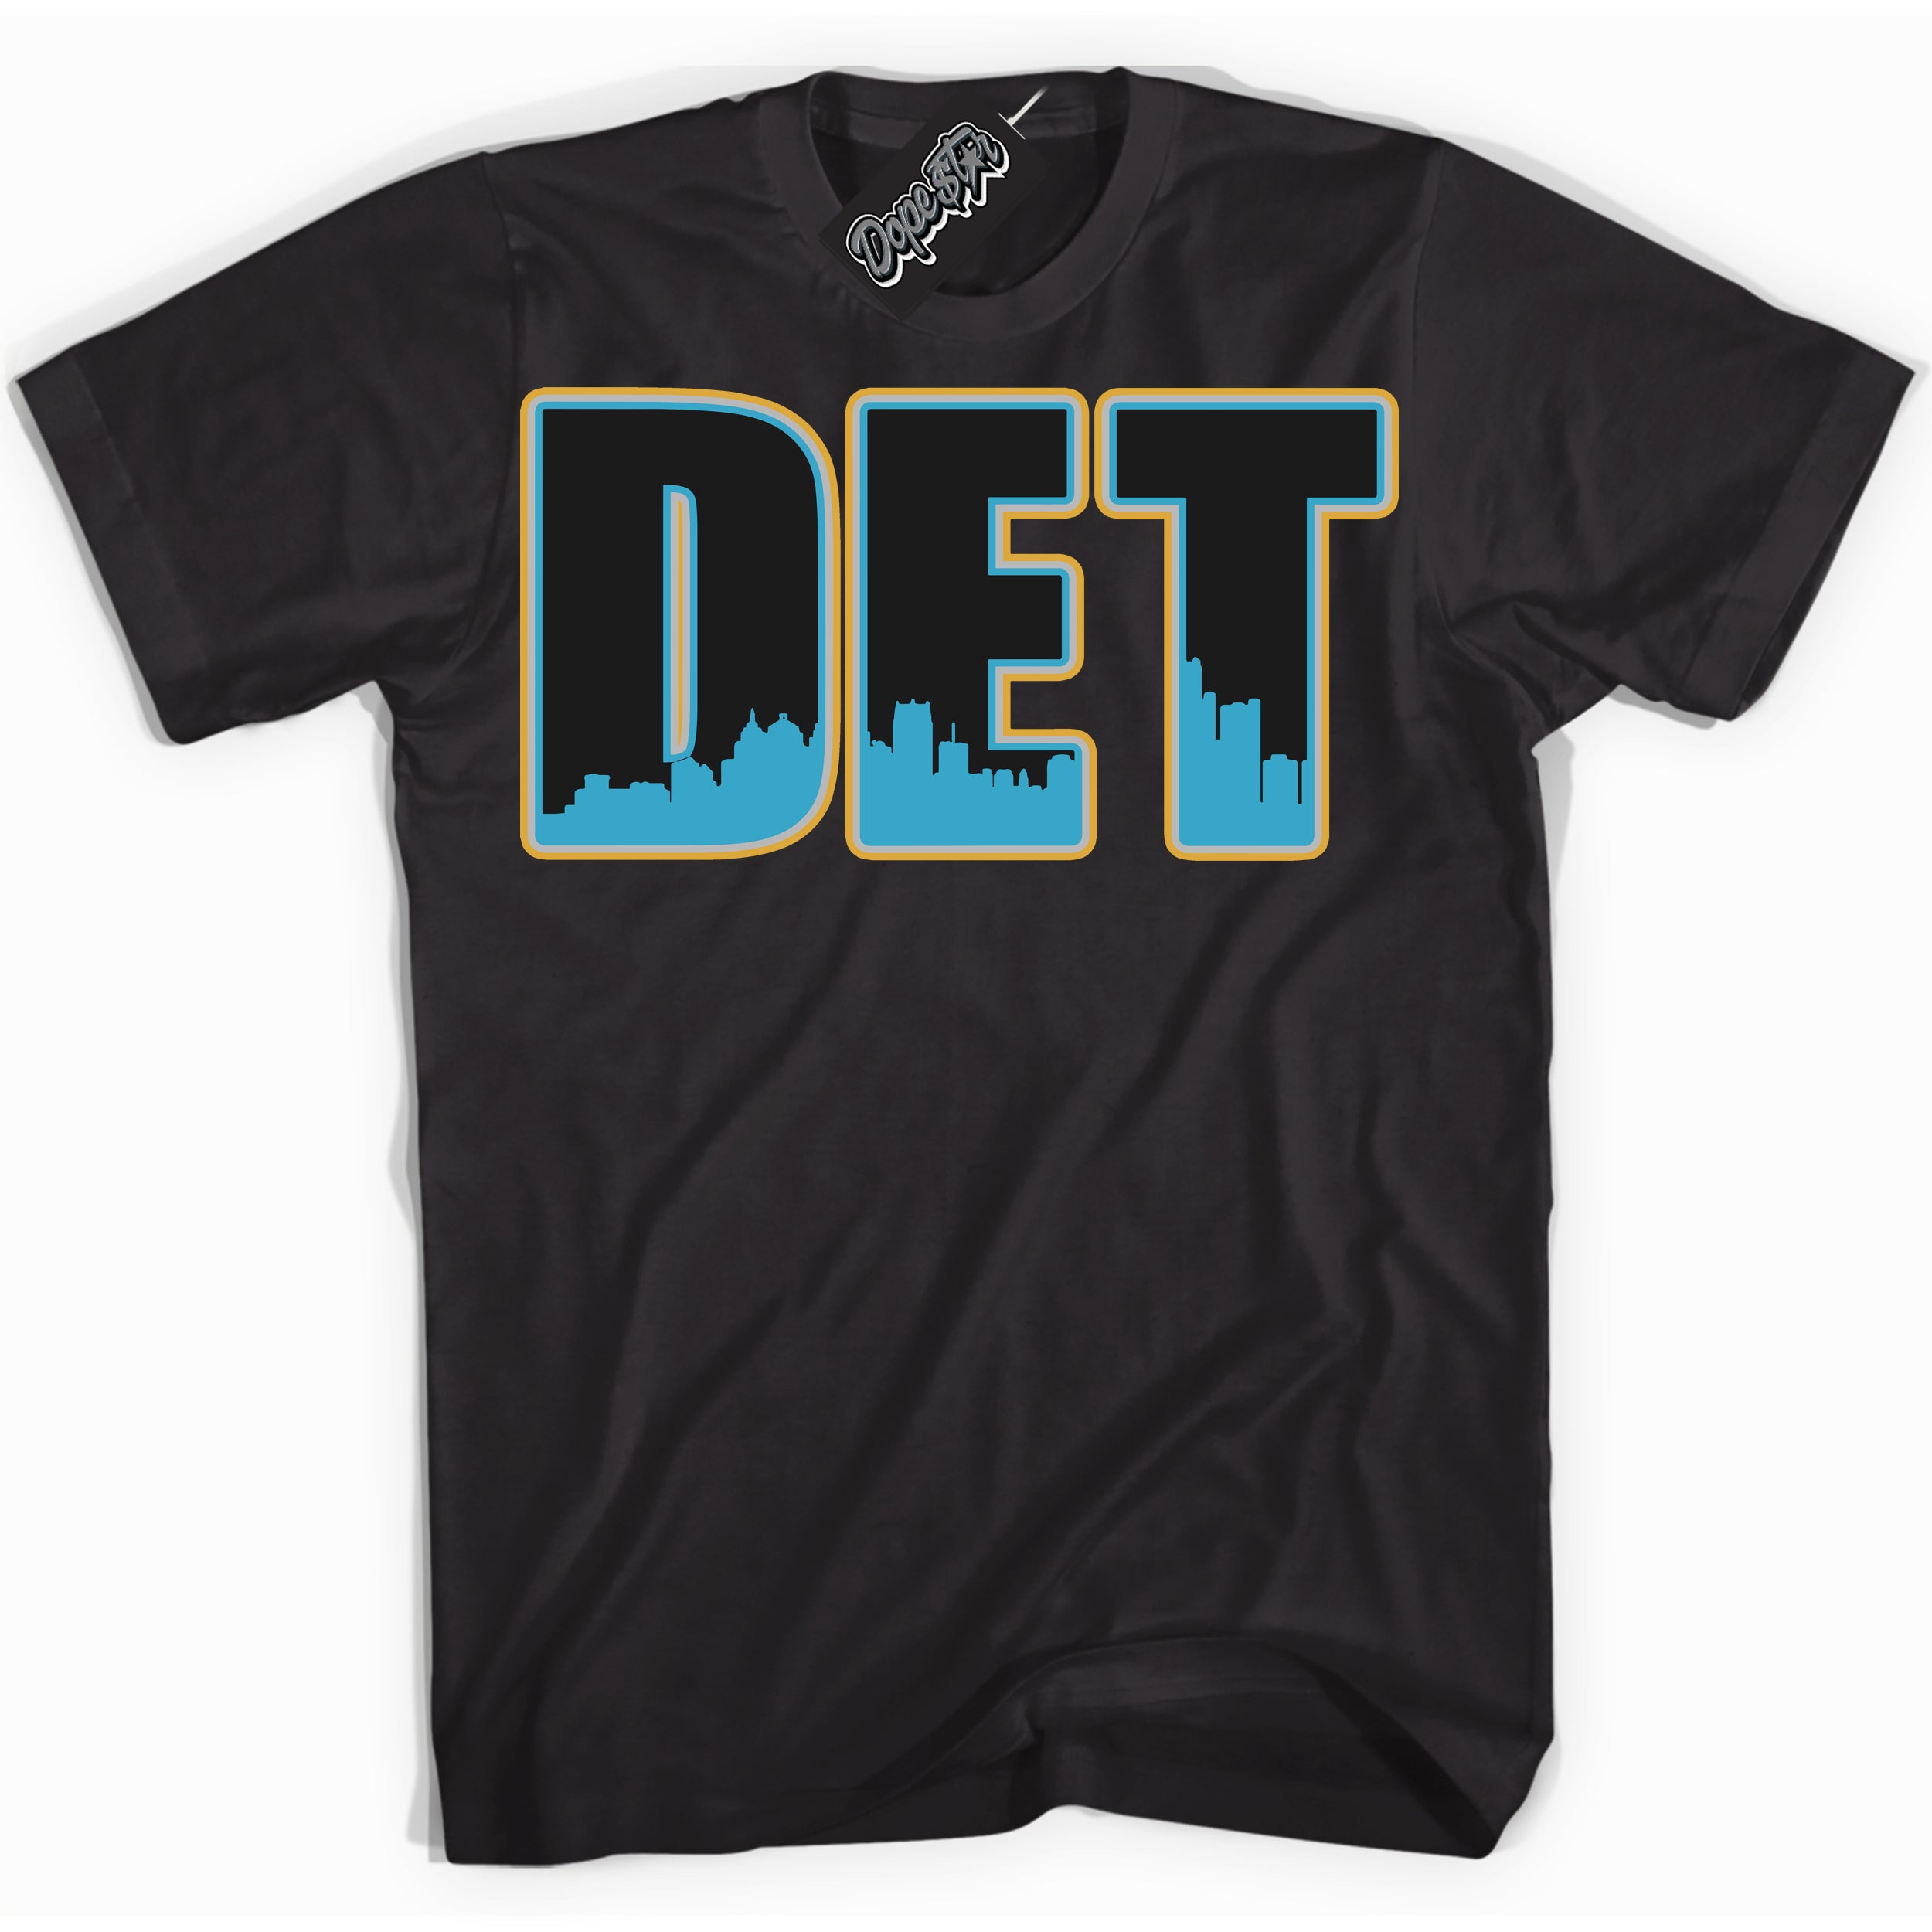 Cool Black Shirt with “ Detroit” design that perfectly matches Aqua 5s Sneakers.